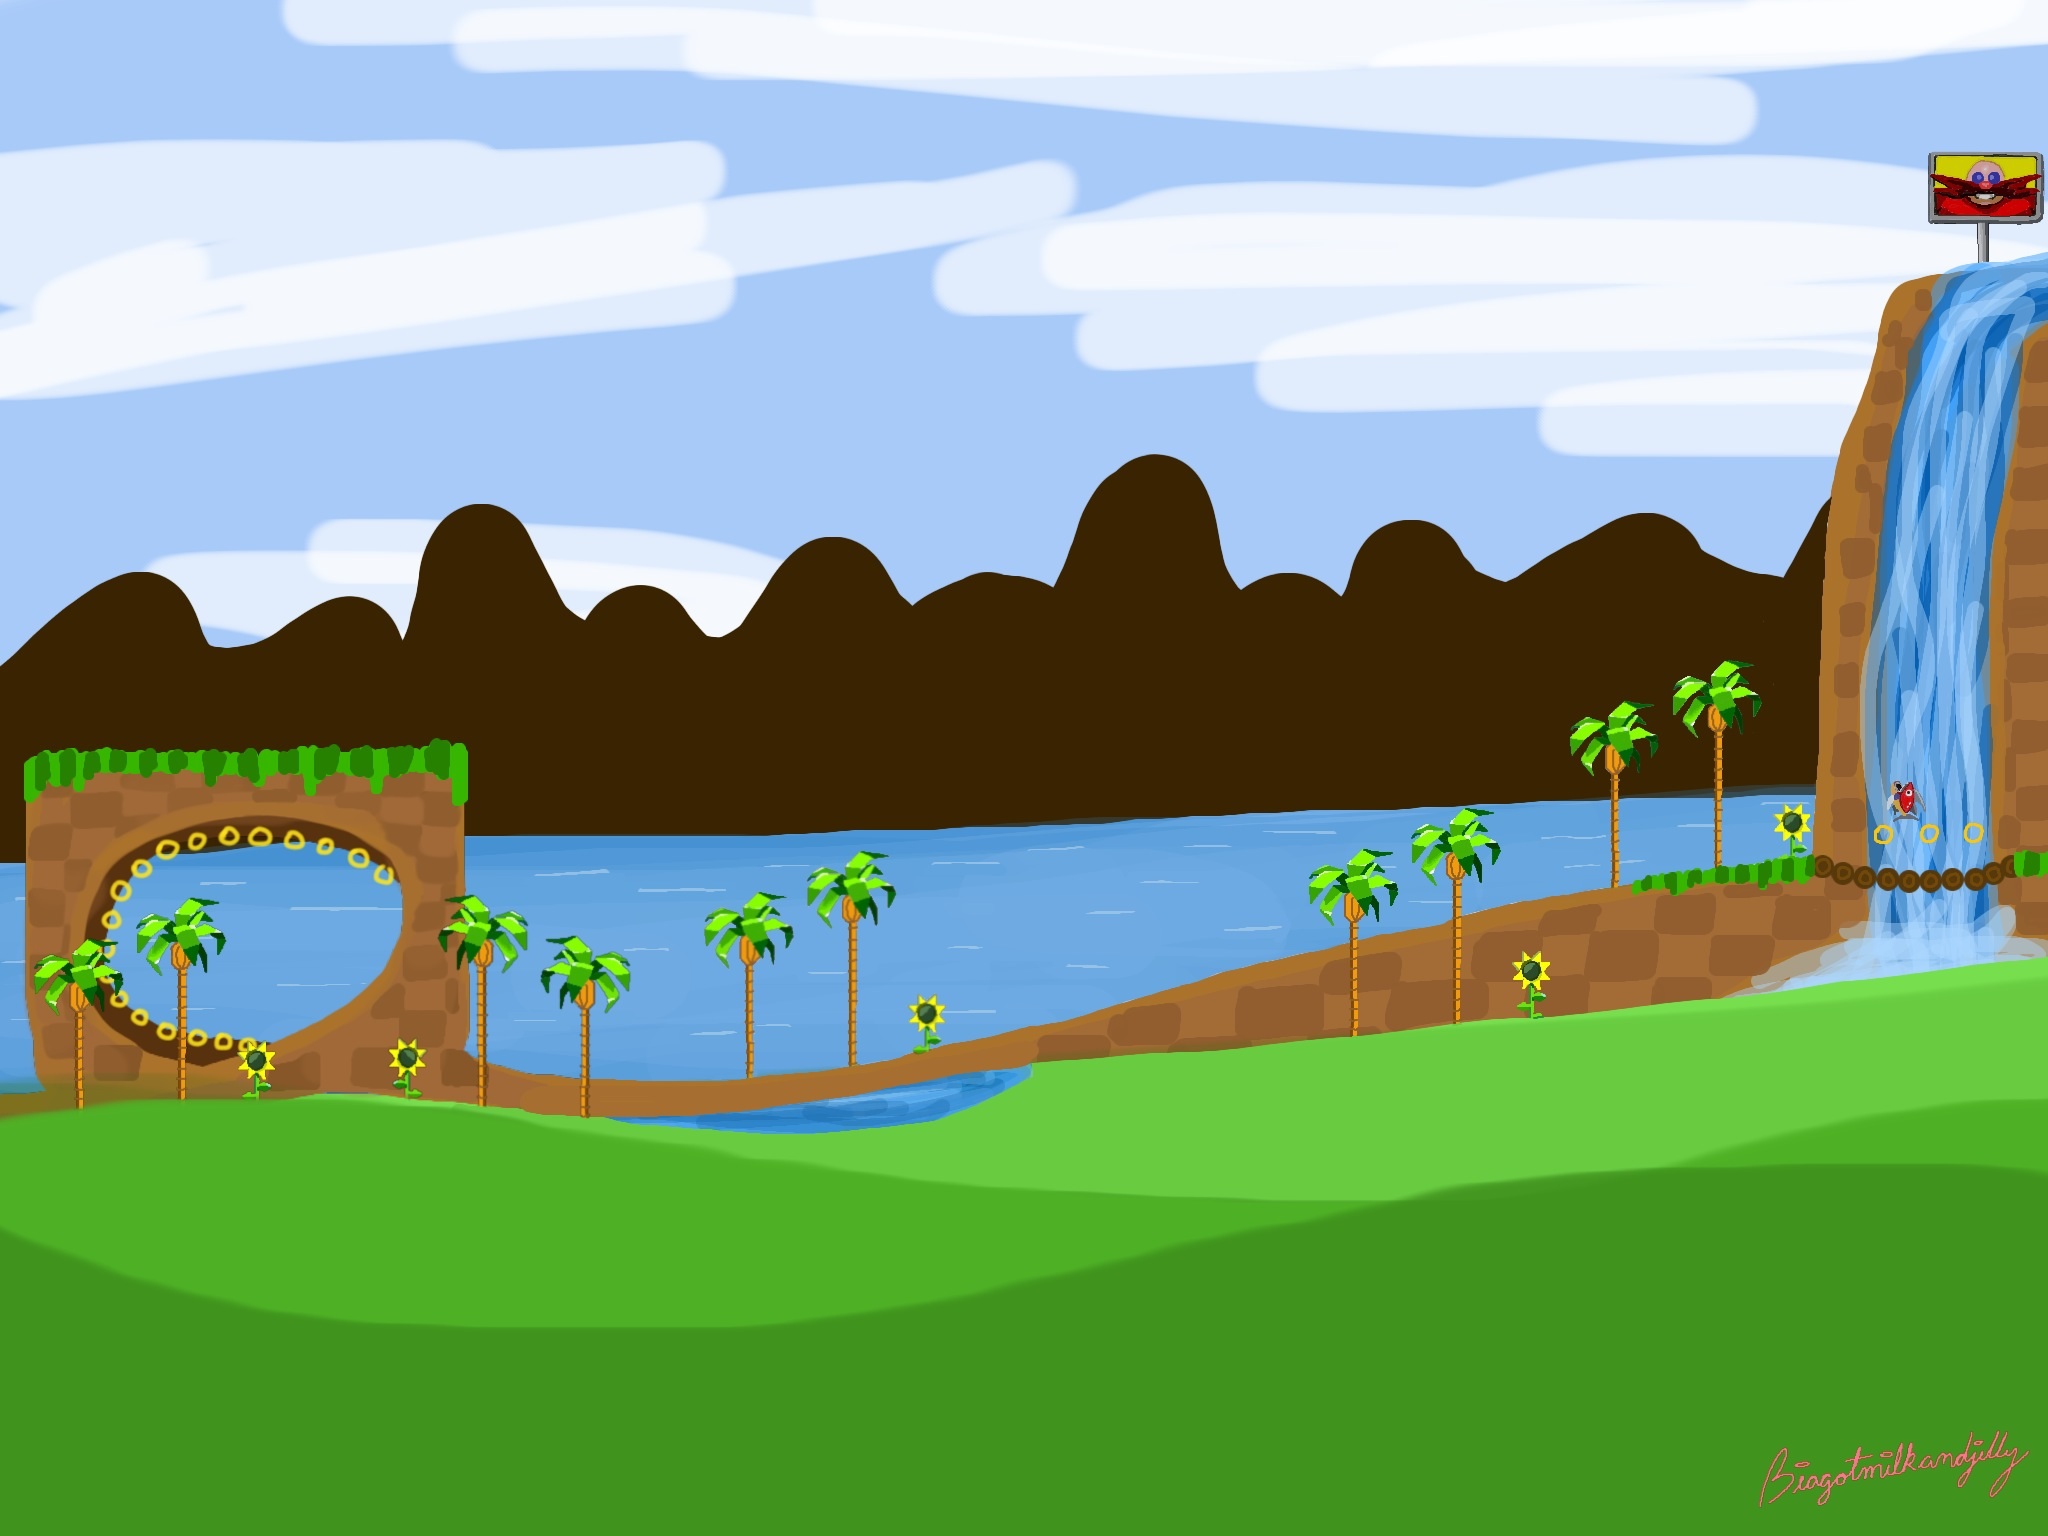 Green Hill Zone PNG and Green Hill Zone Transparent Clipart Free